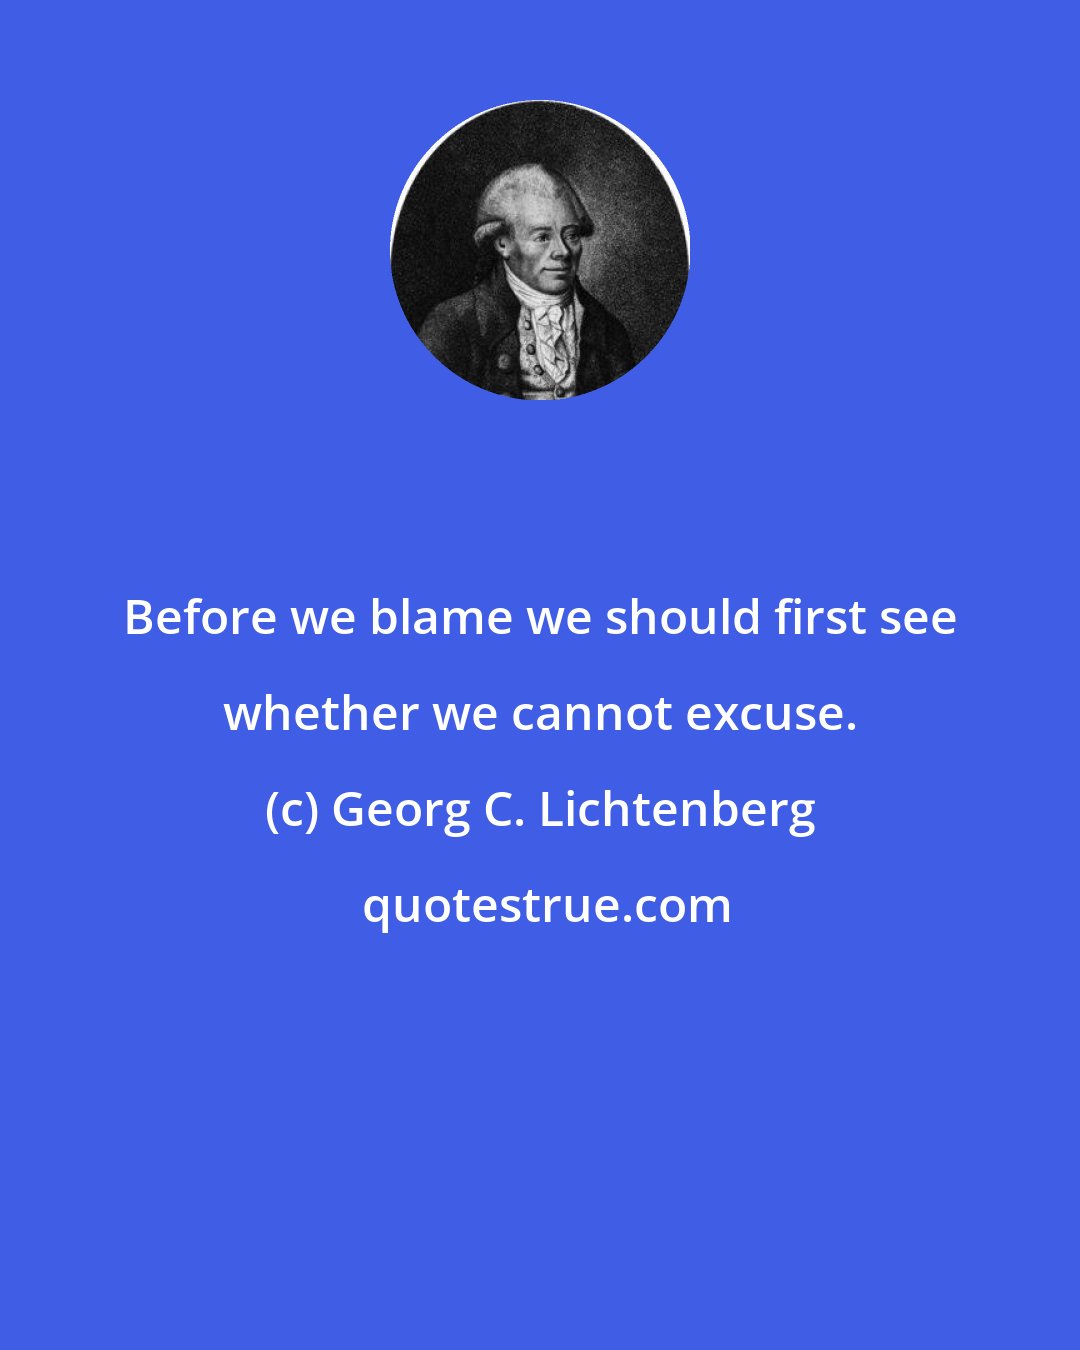 Georg C. Lichtenberg: Before we blame we should first see whether we cannot excuse.